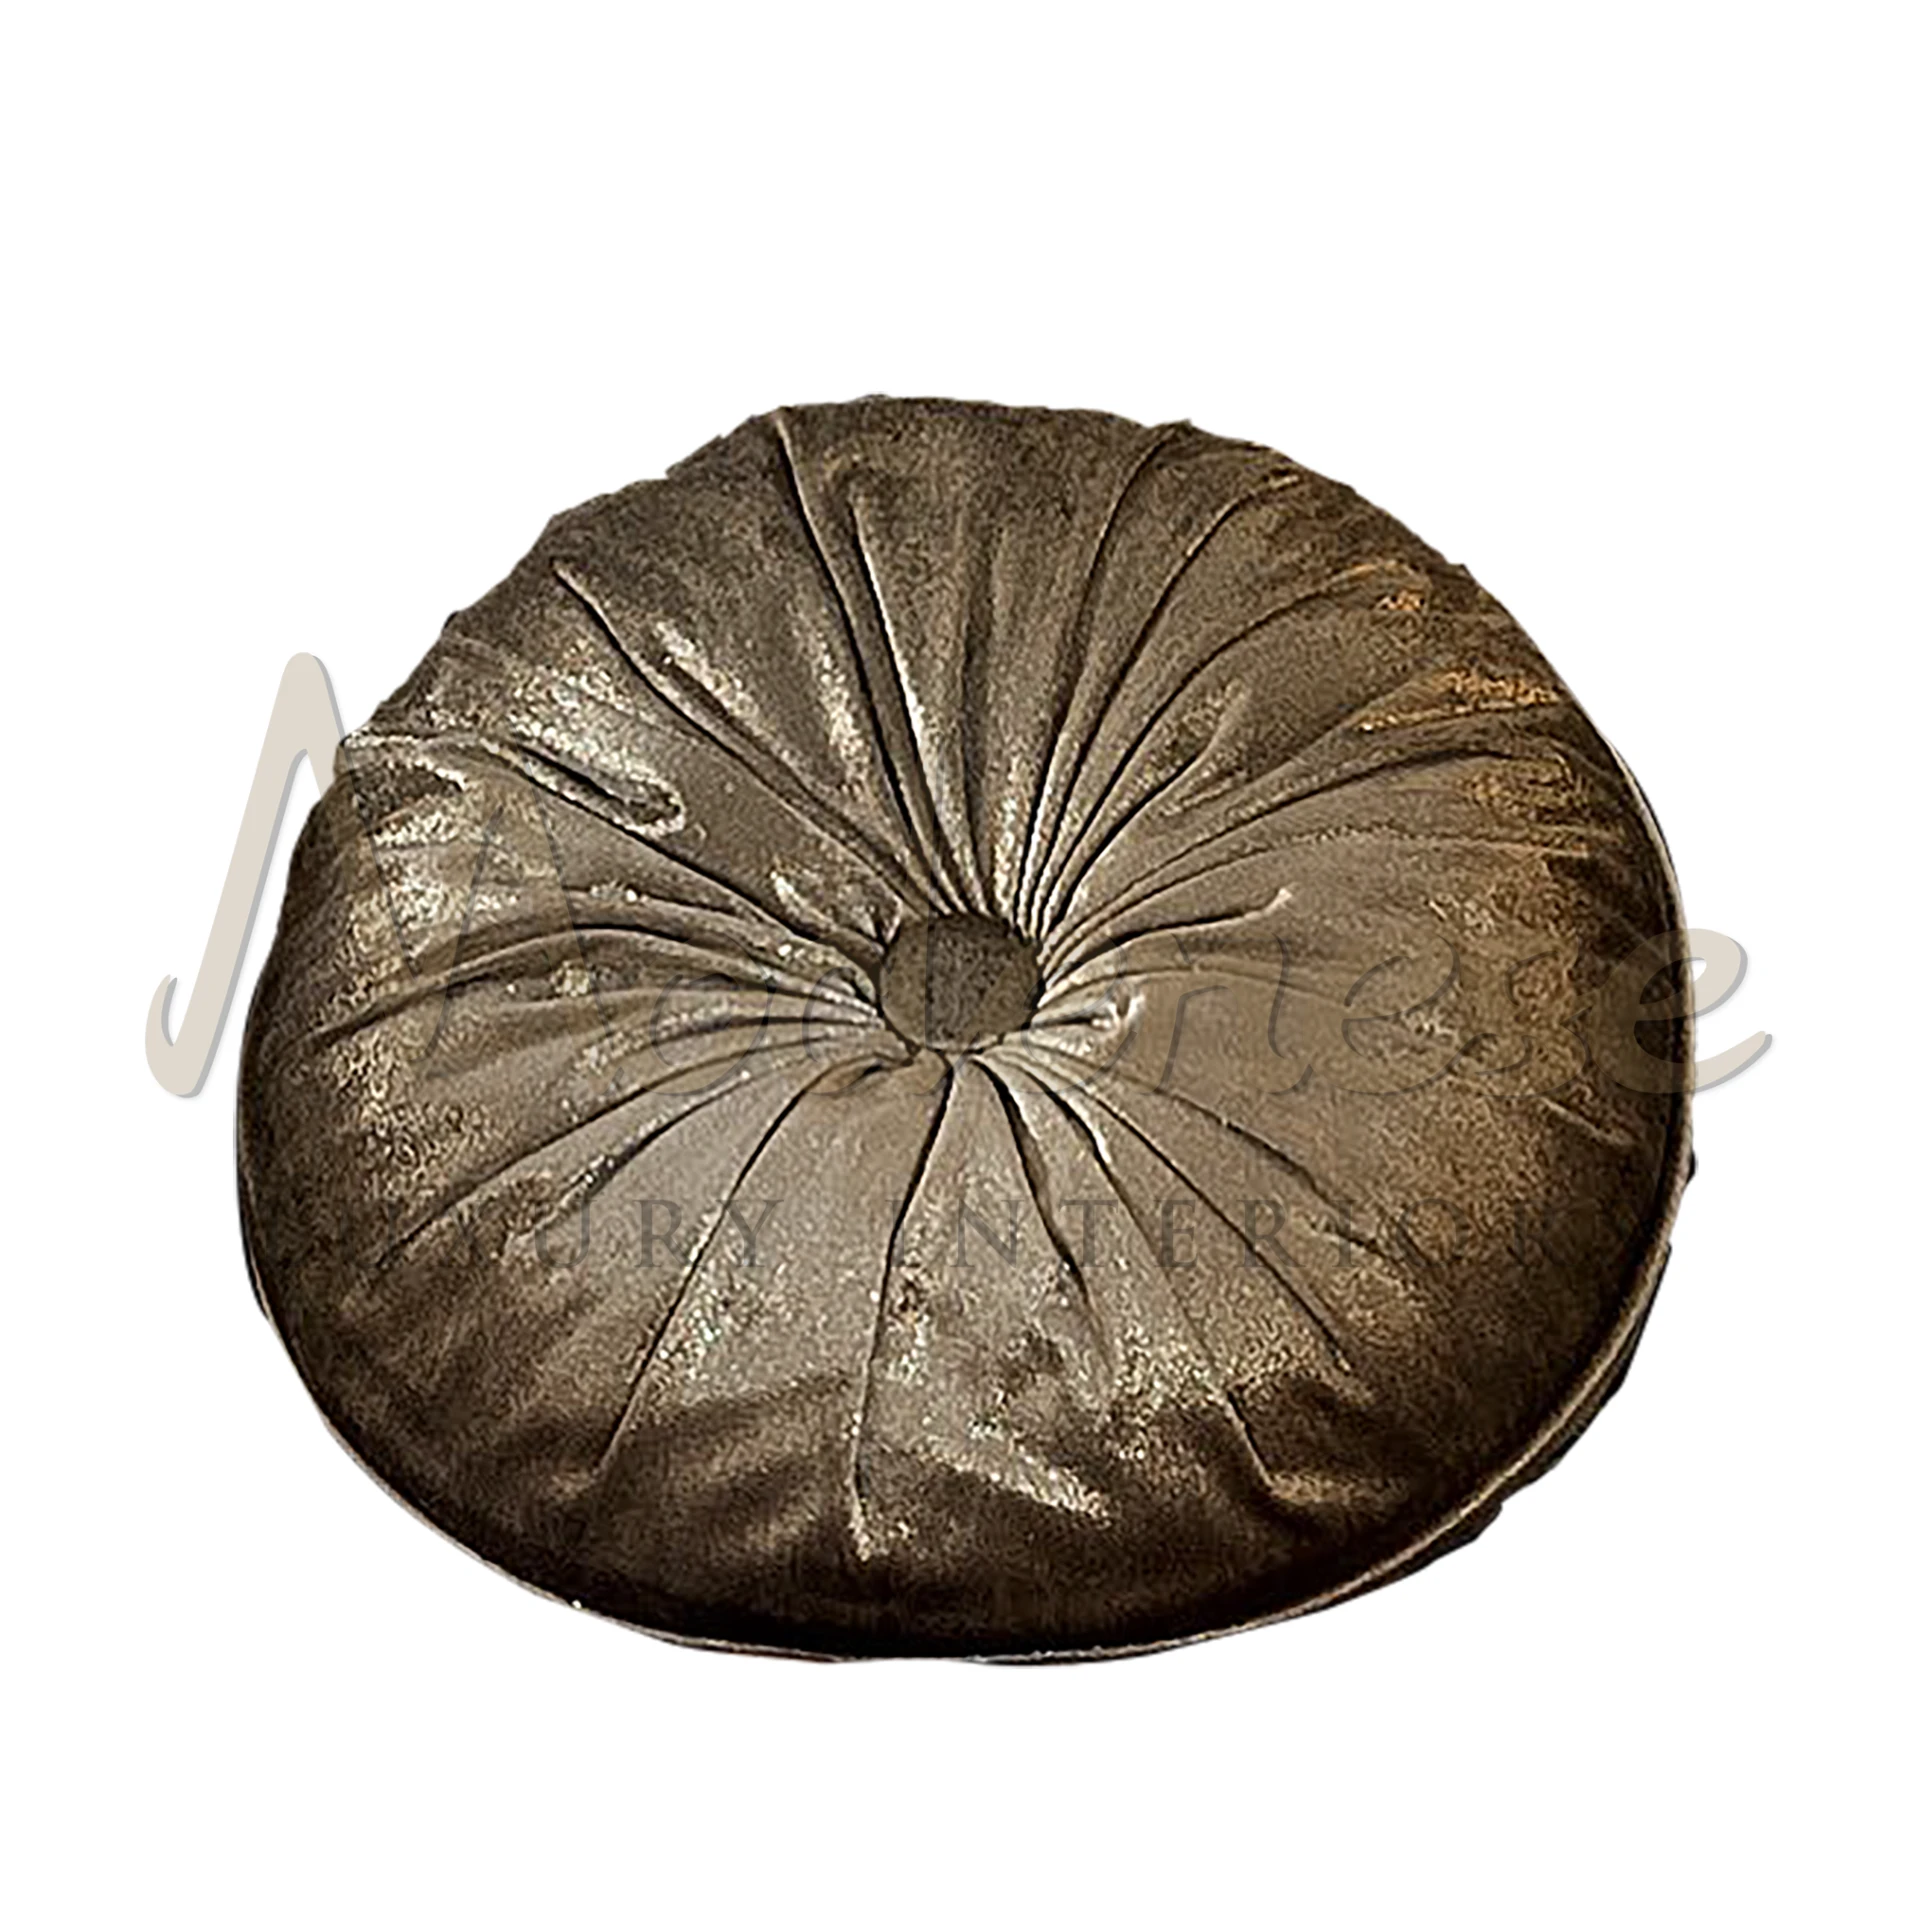 Exquisite Baroque Round Pillow with opulent details, showcasing the pinnacle of Italian luxury and sophisticated design.